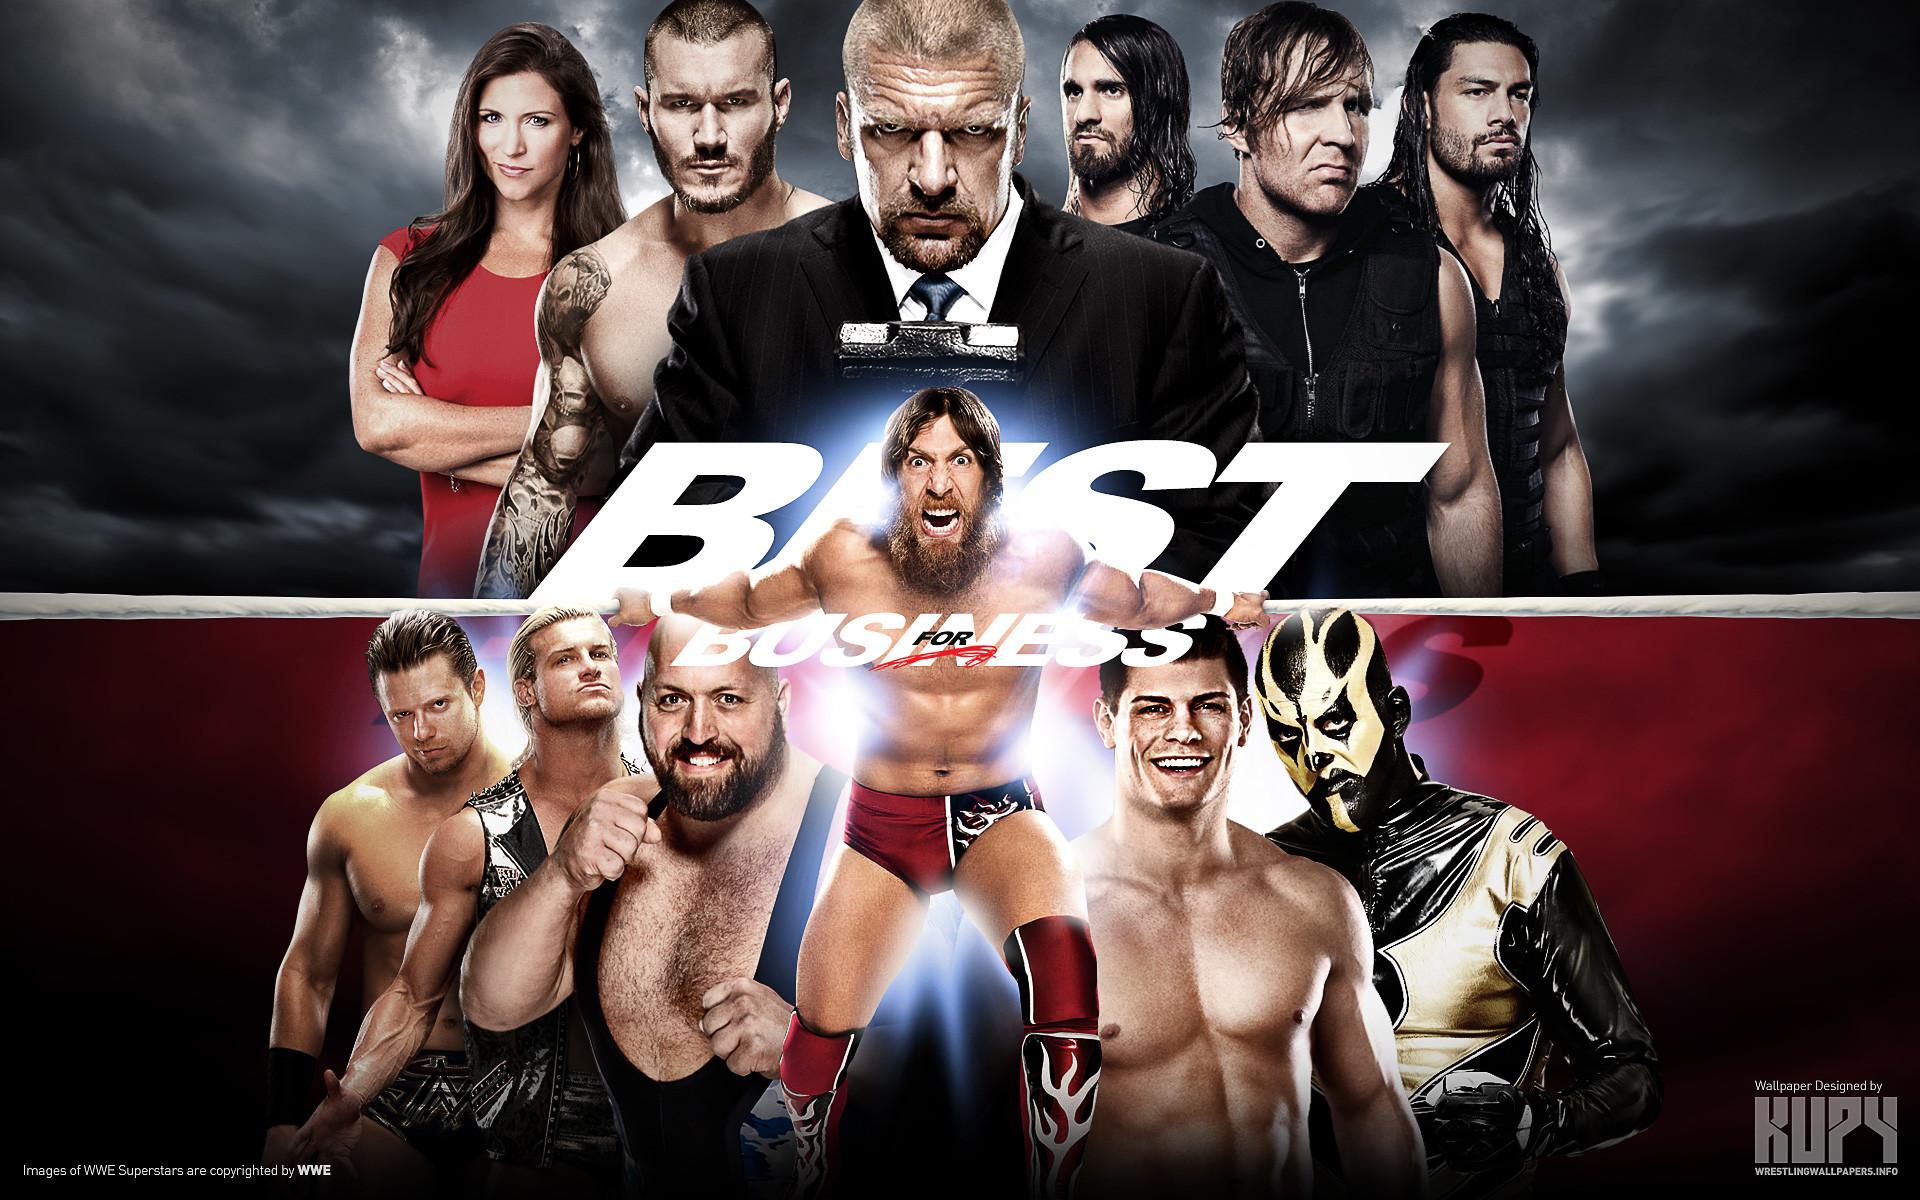 Wwe Superstars 2018 Wallpaper background picture